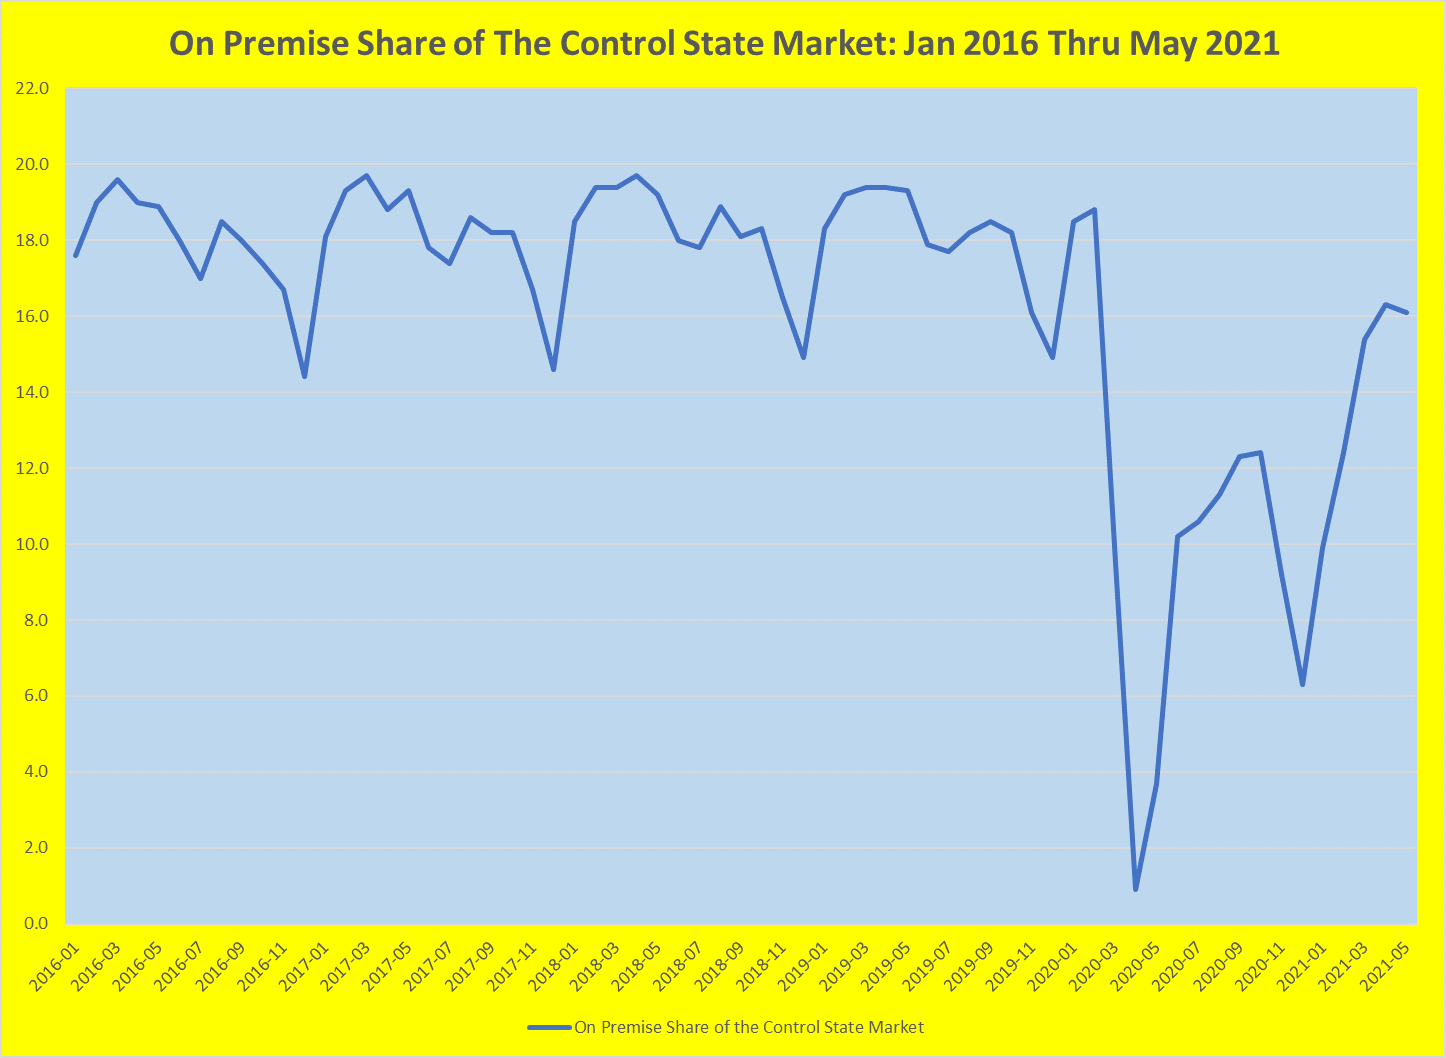 On-Premise share of the Control State Market: Jan 2016 - May 2021